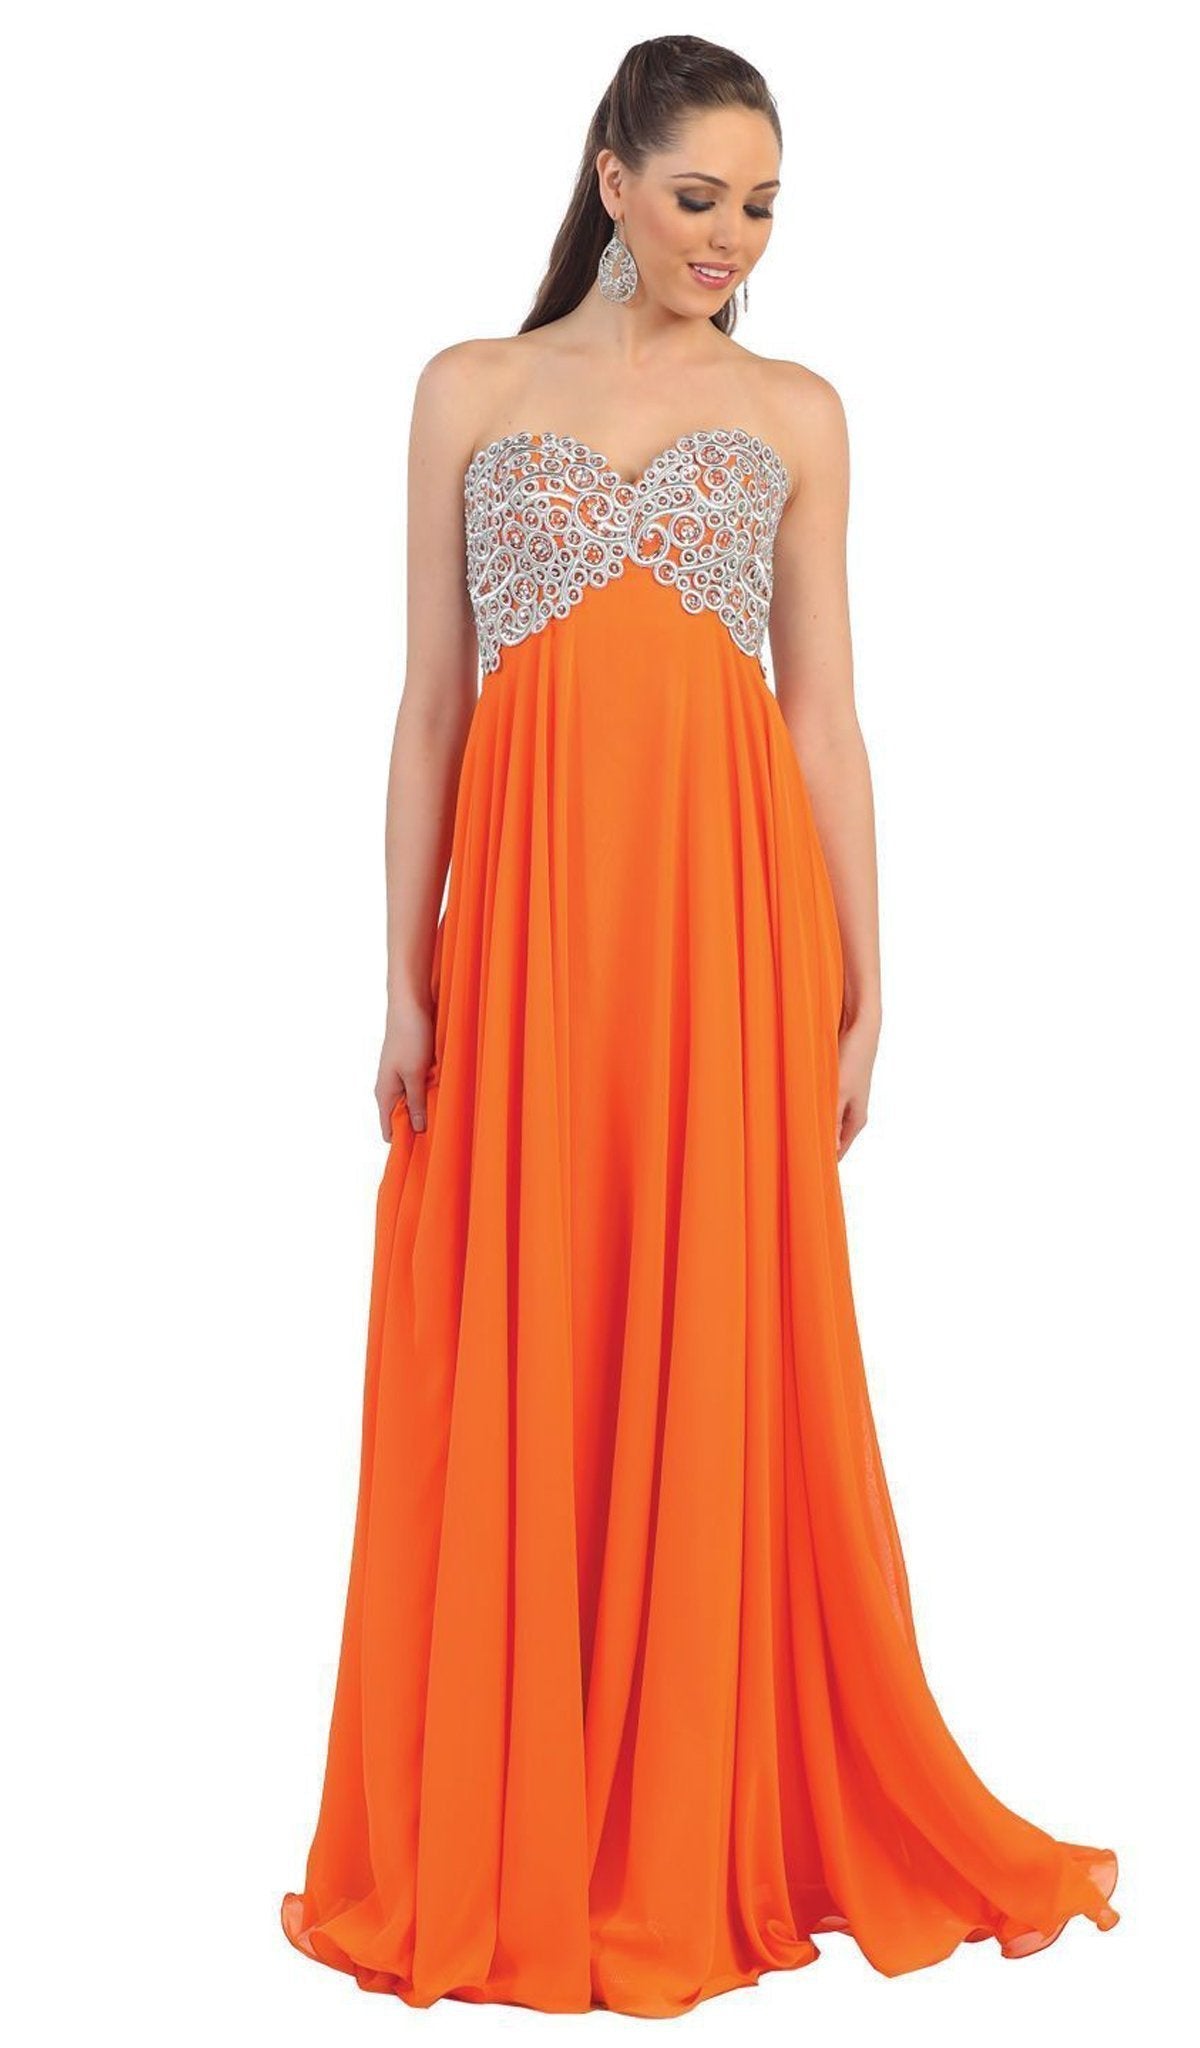 May Queen - Metallic Ornate Lace Up A-Line Evening Gown Special Occasion Dress 4 / Orange